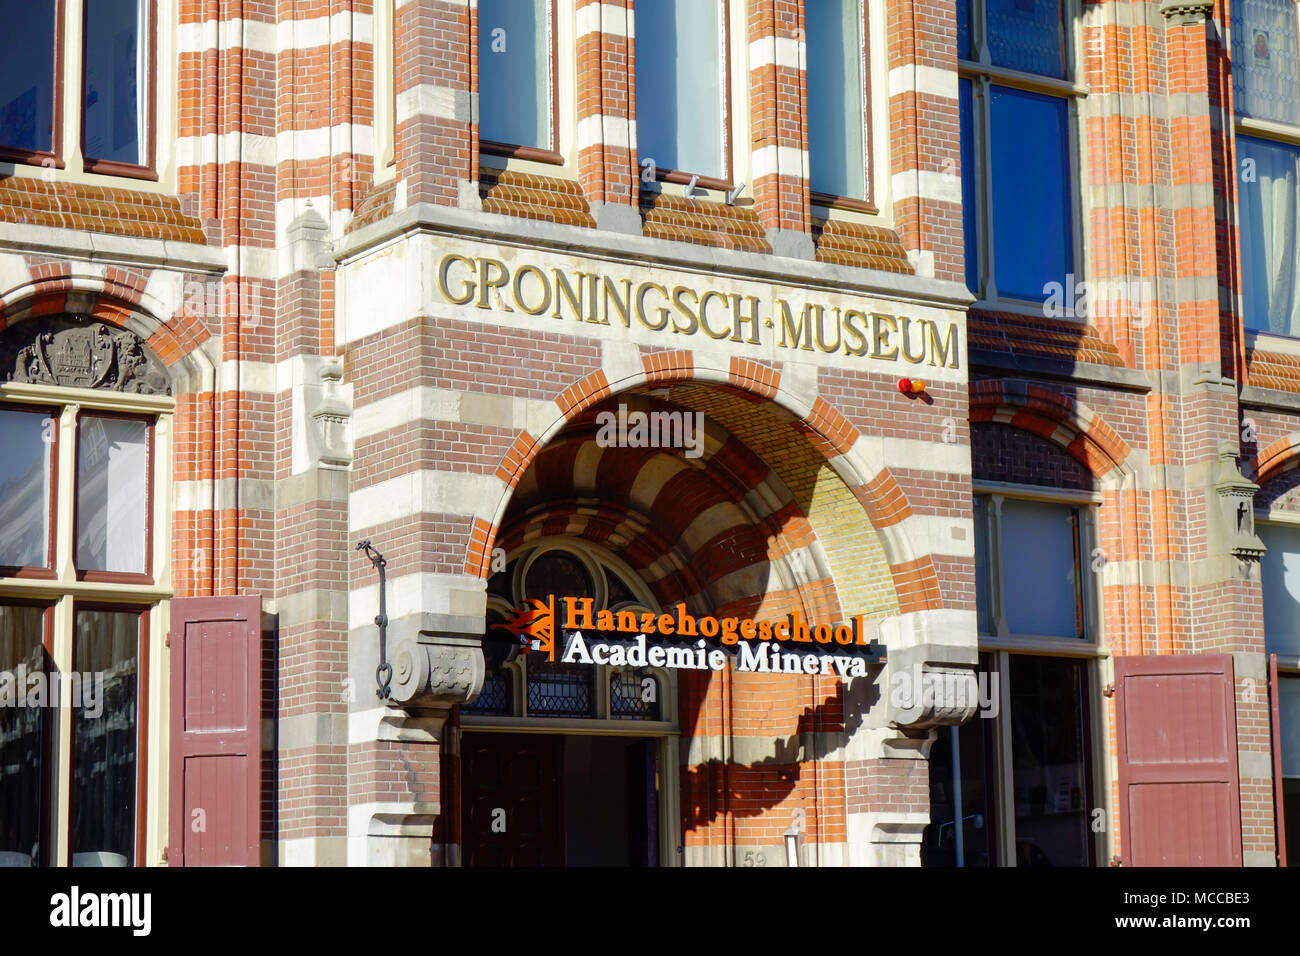 Academie Minerva, Dutch art academy in the centre of the city of Groningen, Netherlands. Part of Hanze University of Applied Sciences Stock Photo